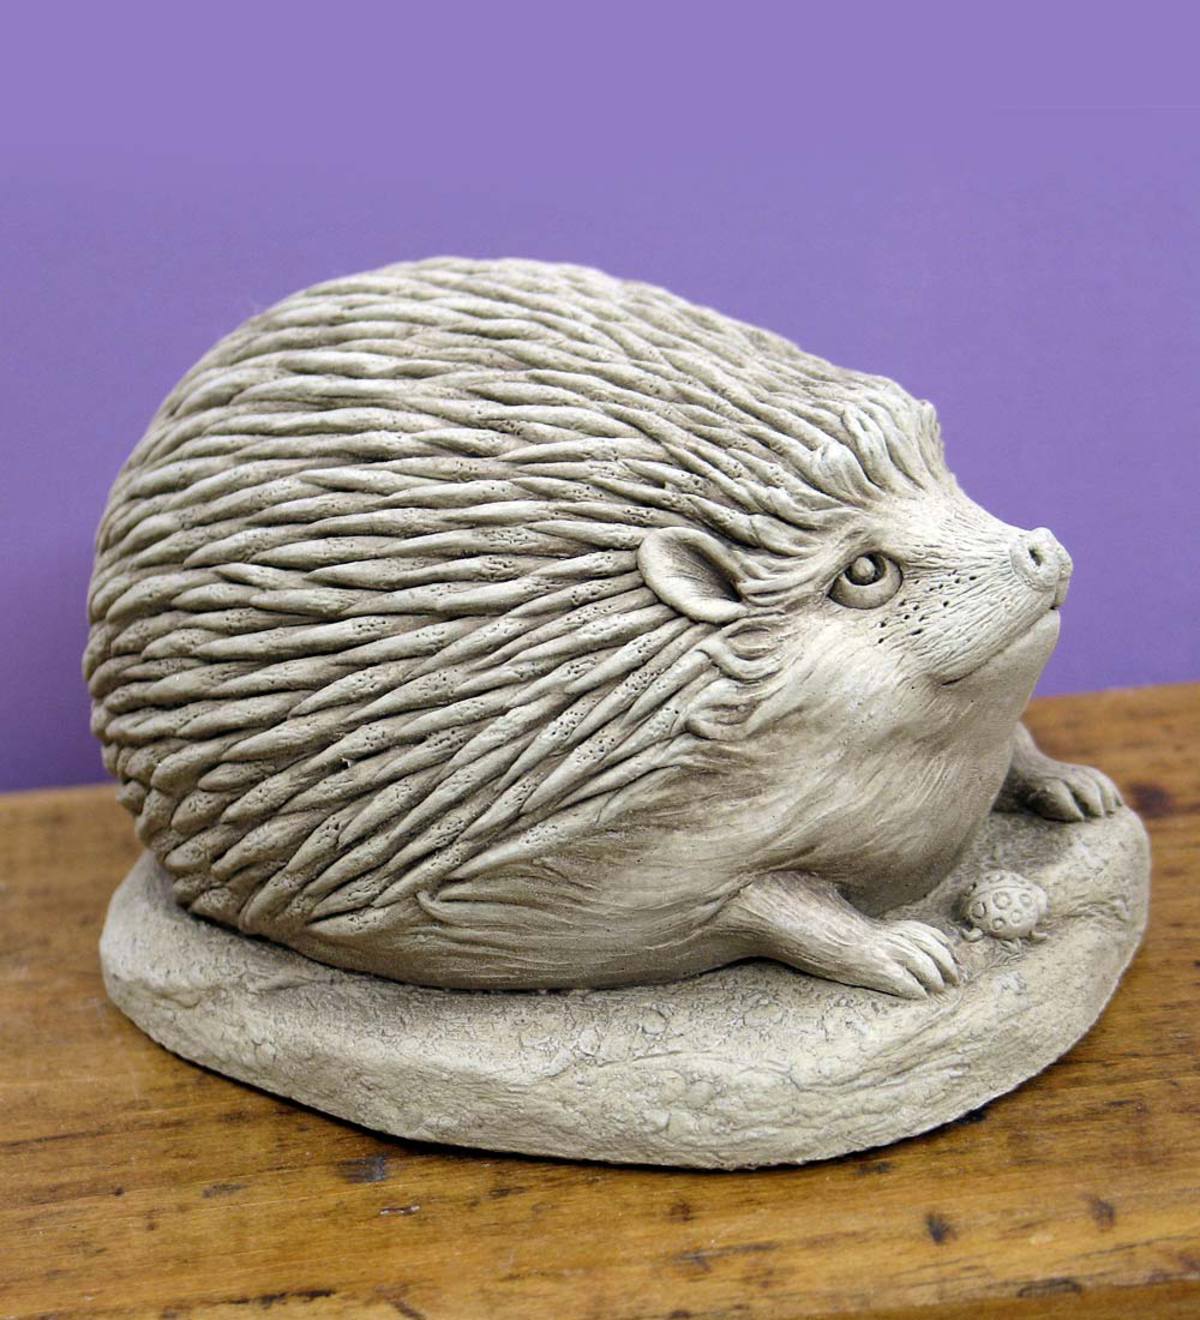 Henry Hedgehog Stone Sculpture by Carruth Studio | Wind and Weather